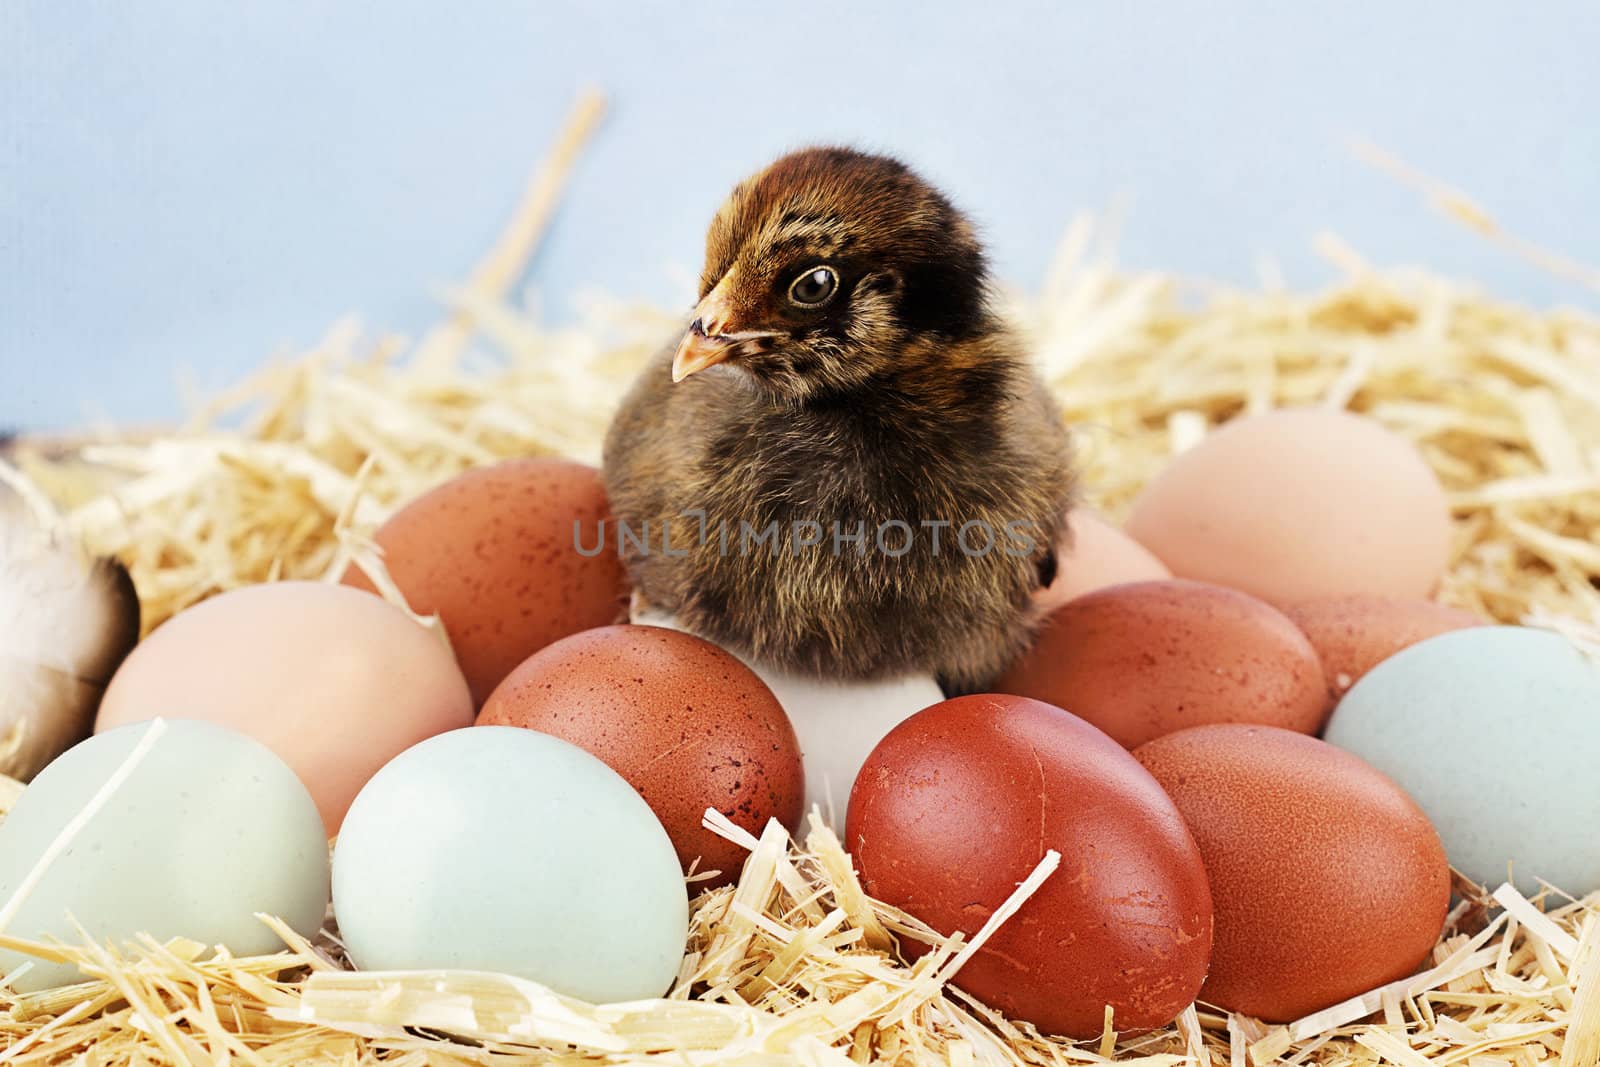 Adorable little Araucana chick sitting on top of a variety of organic farm fresh eggs.  Araucanas are also known as the Easter Chicken for the blue or greenish colored eggs they lay.